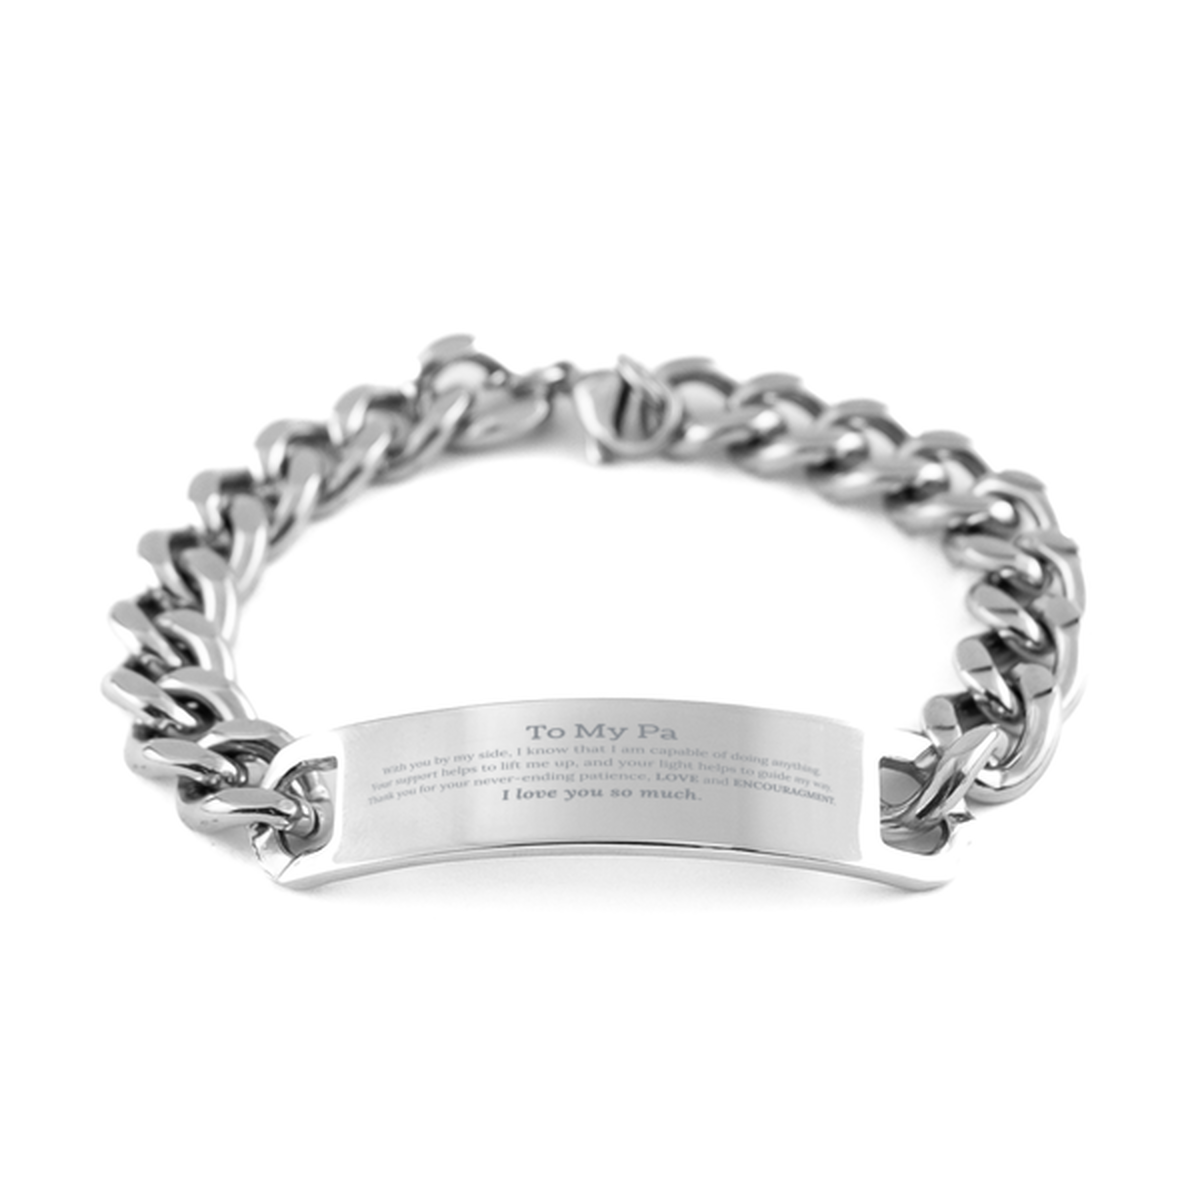 Appreciation Pa Cuban Chain Stainless Steel Bracelet Gifts, To My Pa Birthday Christmas Wedding Keepsake Gifts for Pa With you by my side, I know that I am capable of doing anything. I love you so much